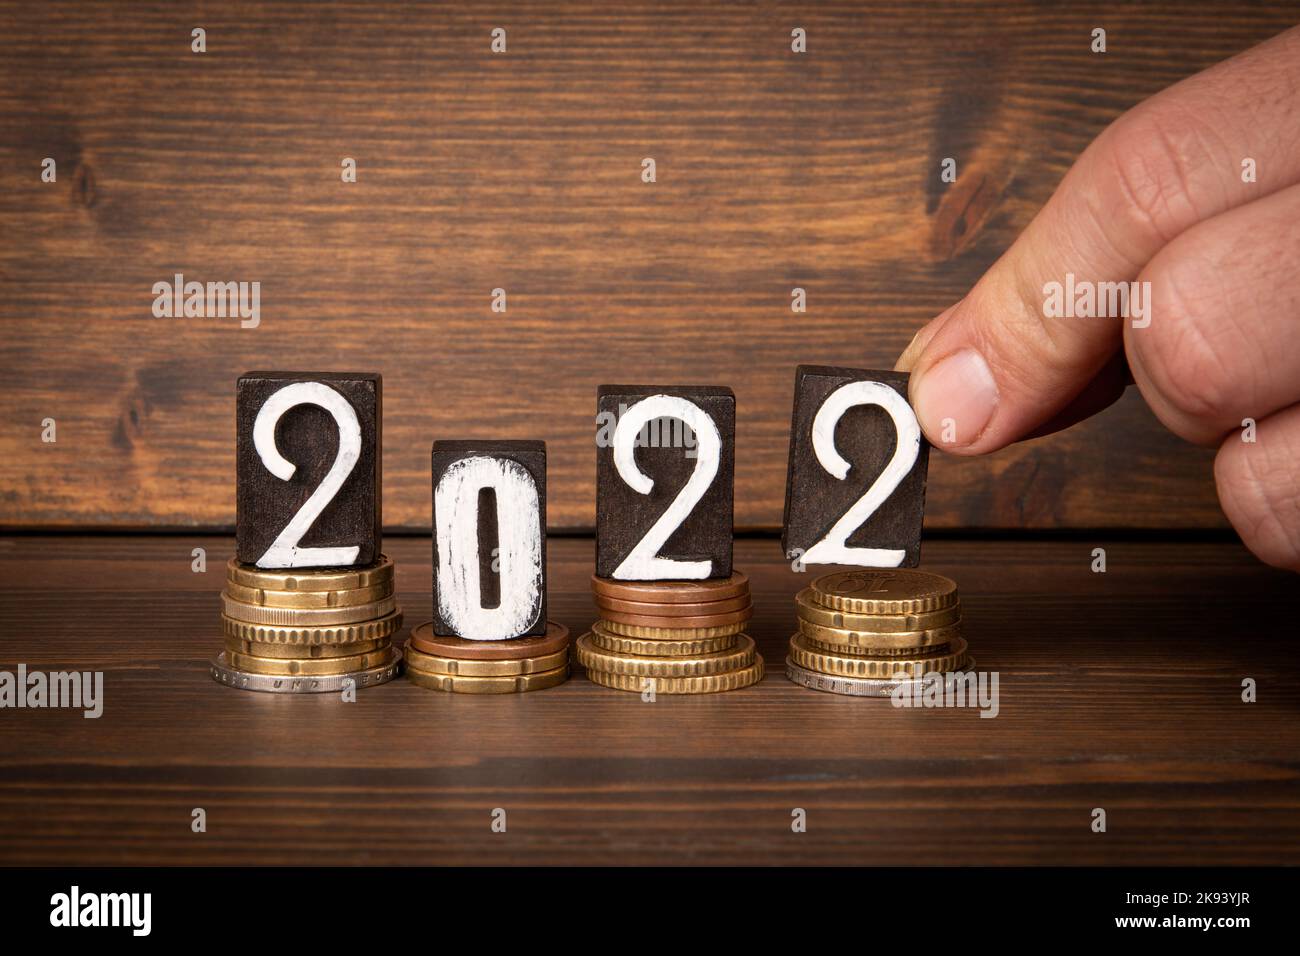 2022 Review concept. Change and wooden blocks on wood texture background. Stock Photo